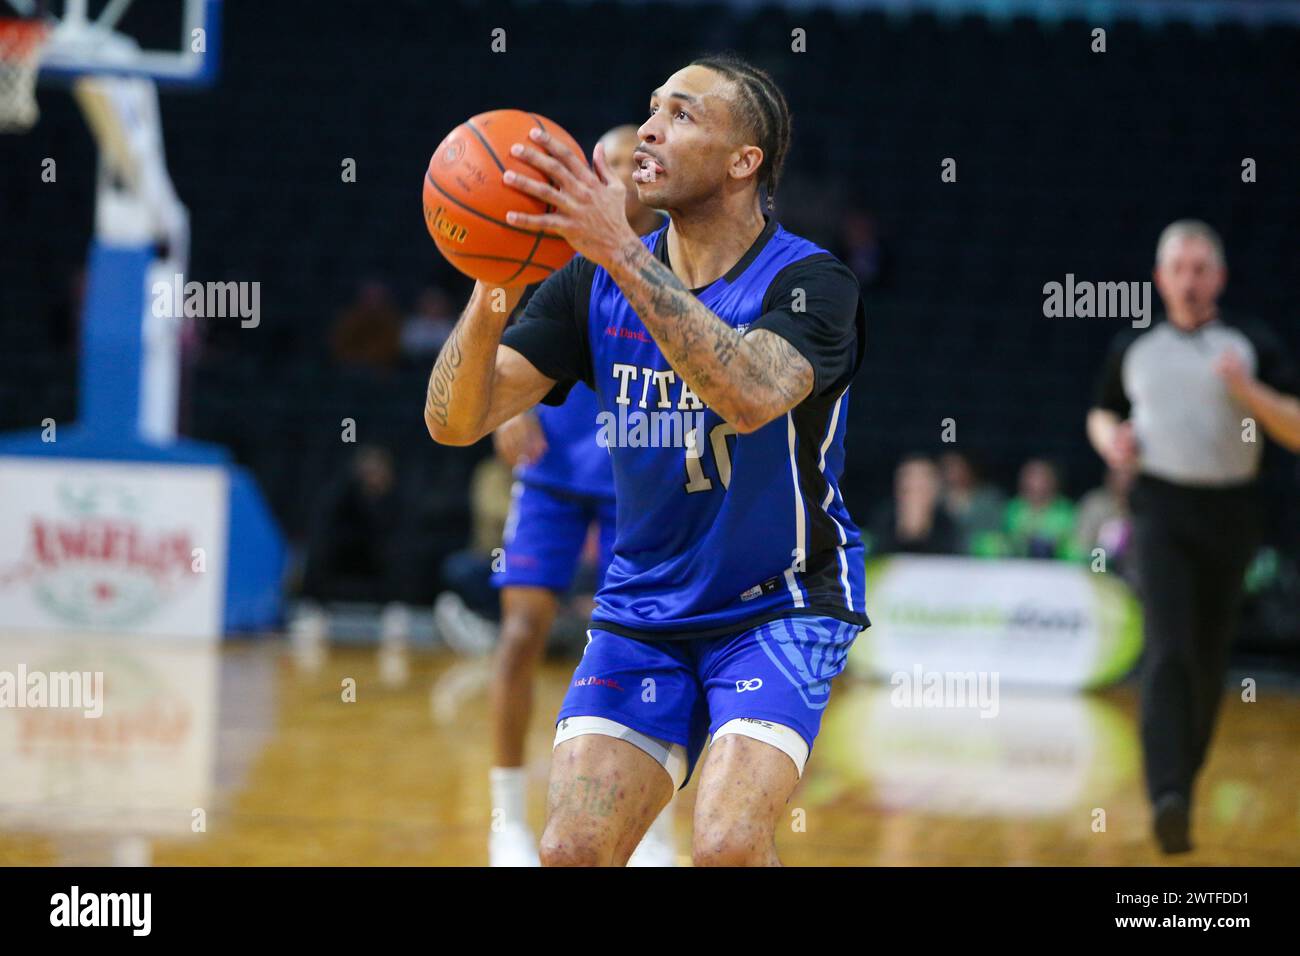 London, Canada. 17th Mar, 2024. London Ontario Canada. March 17 2024, The London Lightning defeat the Kitchener Titans 118-114 in regulation on St. Patrick's Day. Marque Maultsby (11) of Kitchener Titans takes free throw. Credit: Luke Durda/Alamy Live News Stock Photo